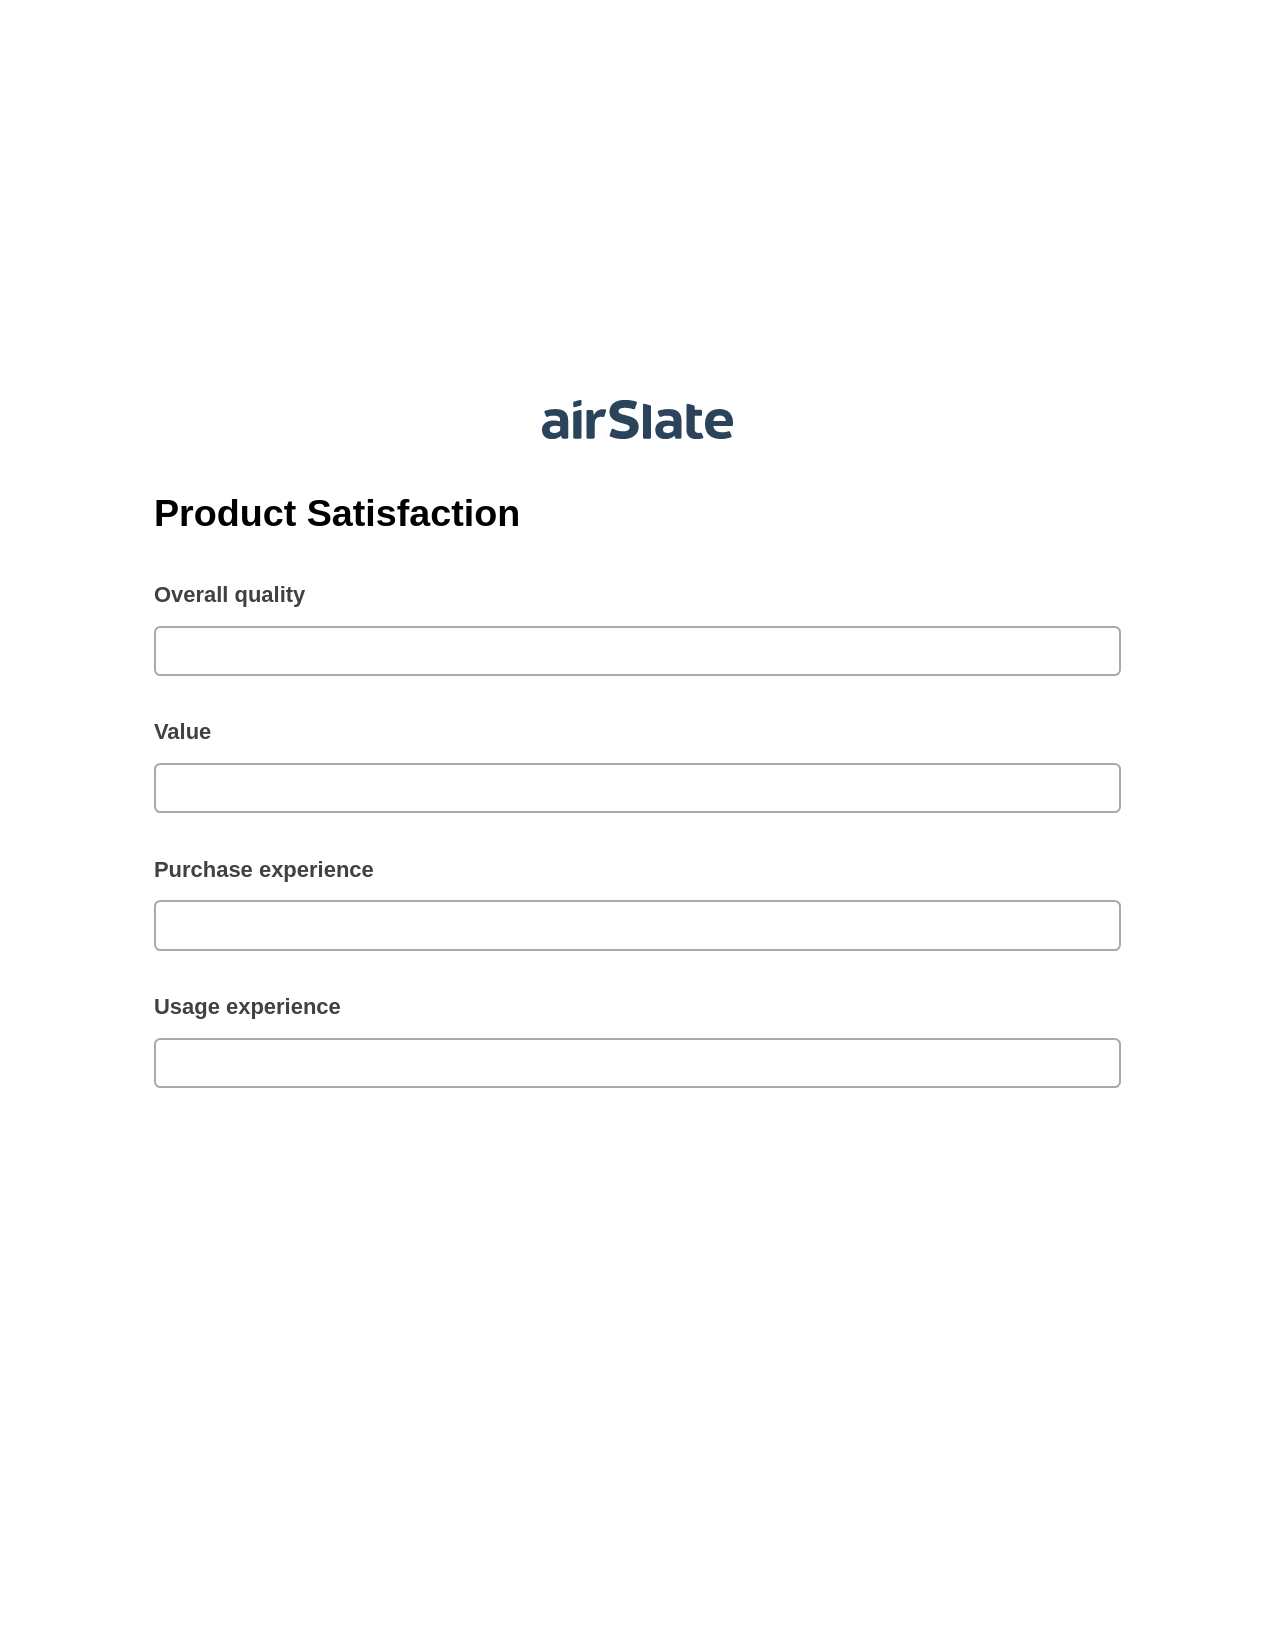 Product Satisfaction Pre-fill Slate from MS Dynamics 365 Records Bot, Google Calendar Bot, Export to Smartsheet